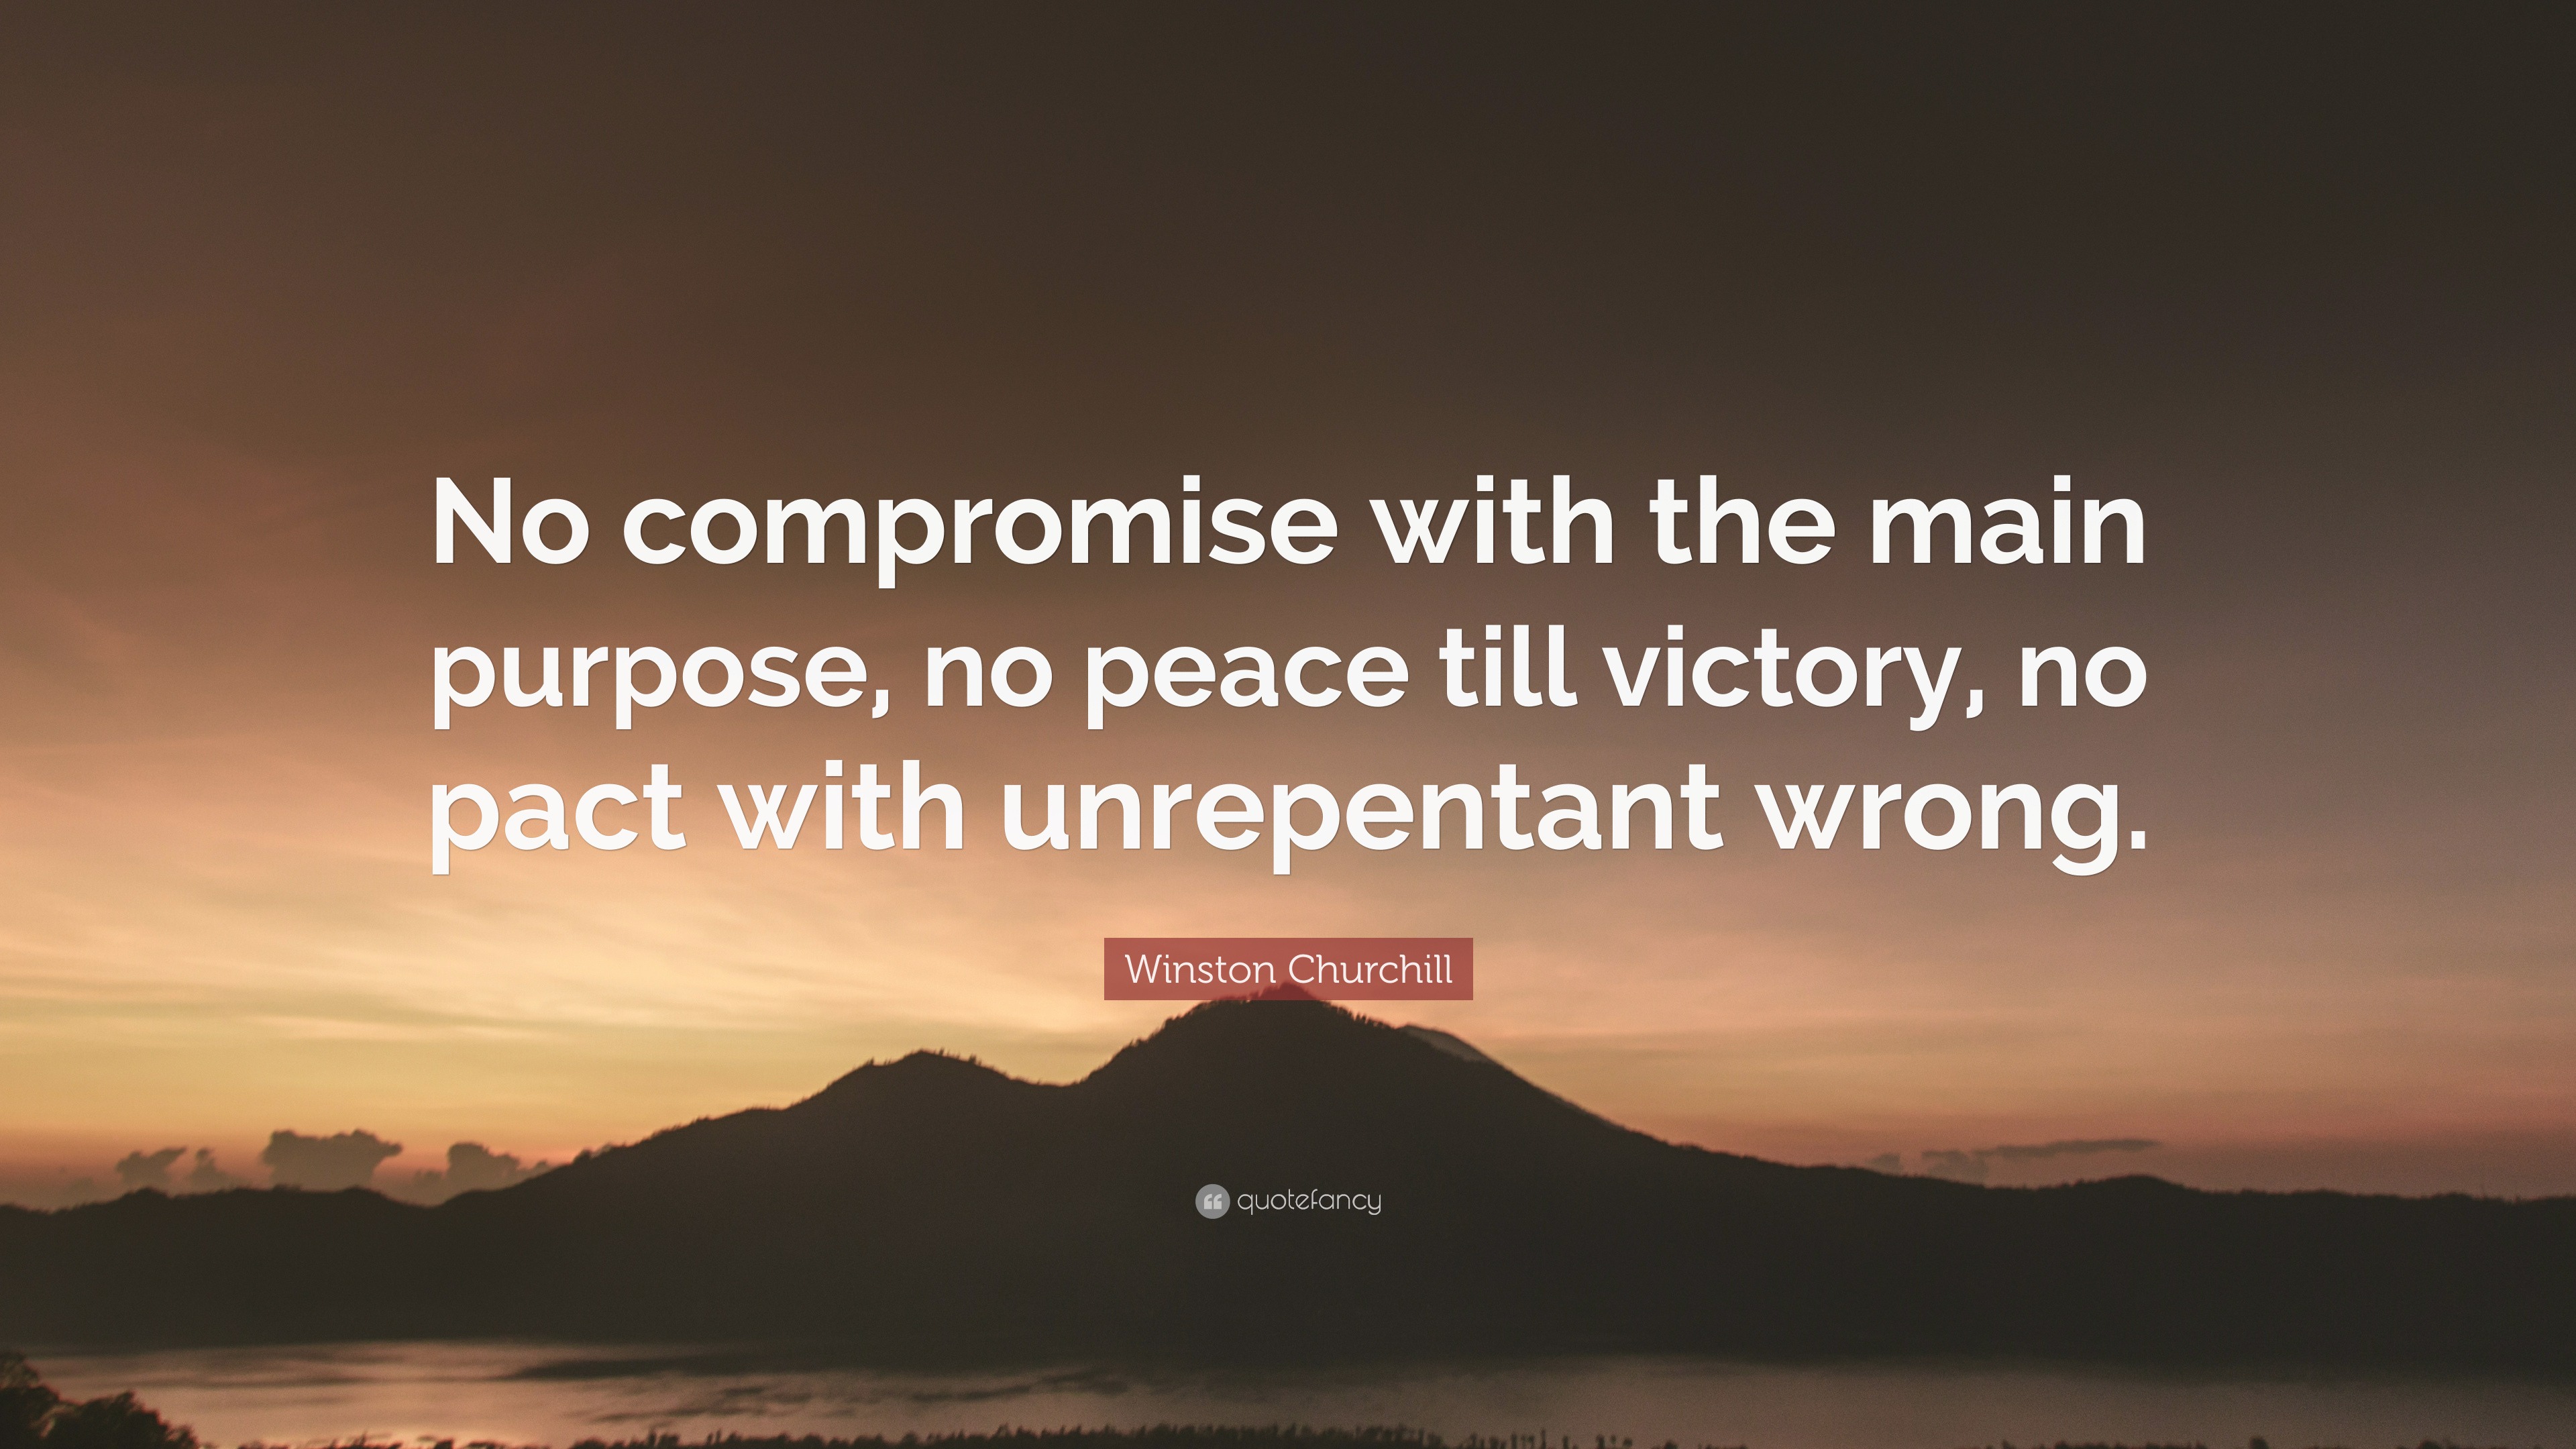 Winston Churchill Quote: “No compromise with the main purpose, no